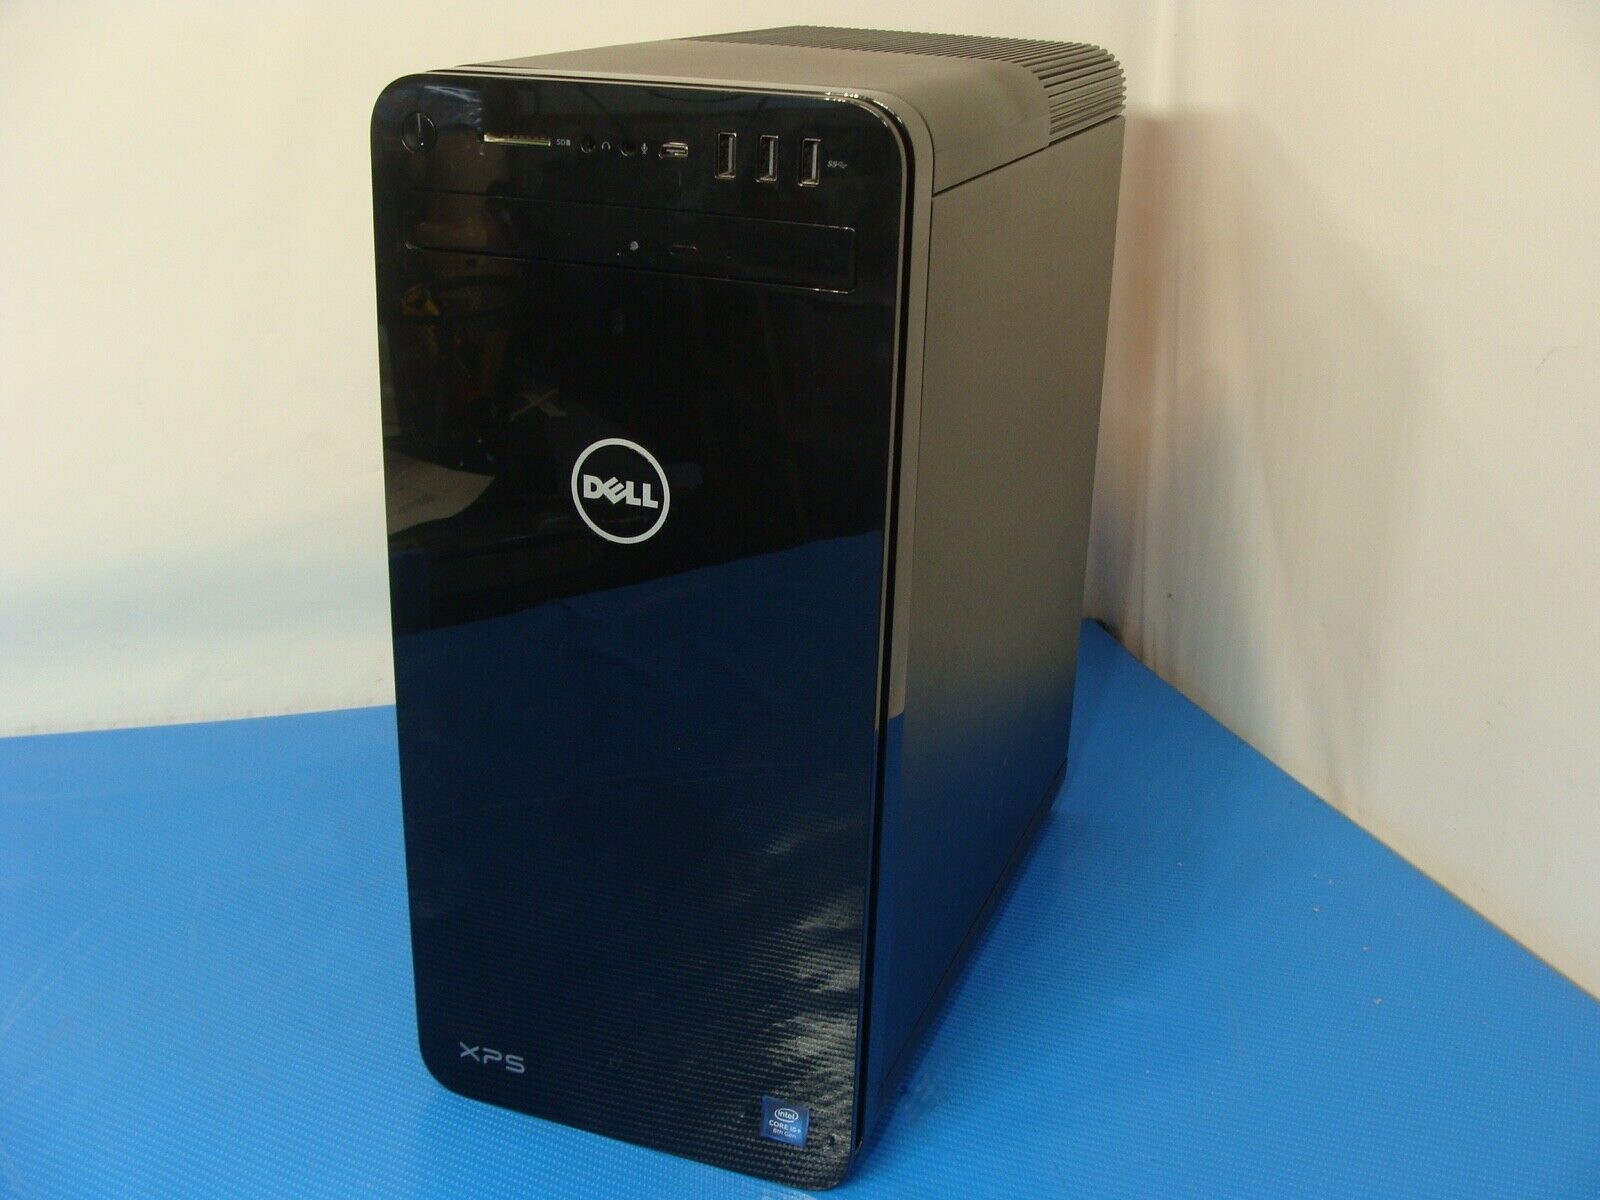 Powerful and Clean Wifi+BT Dell XPS 8930 Intel i5-8400 2.80Ghz 8GB 1TB HDD W10H